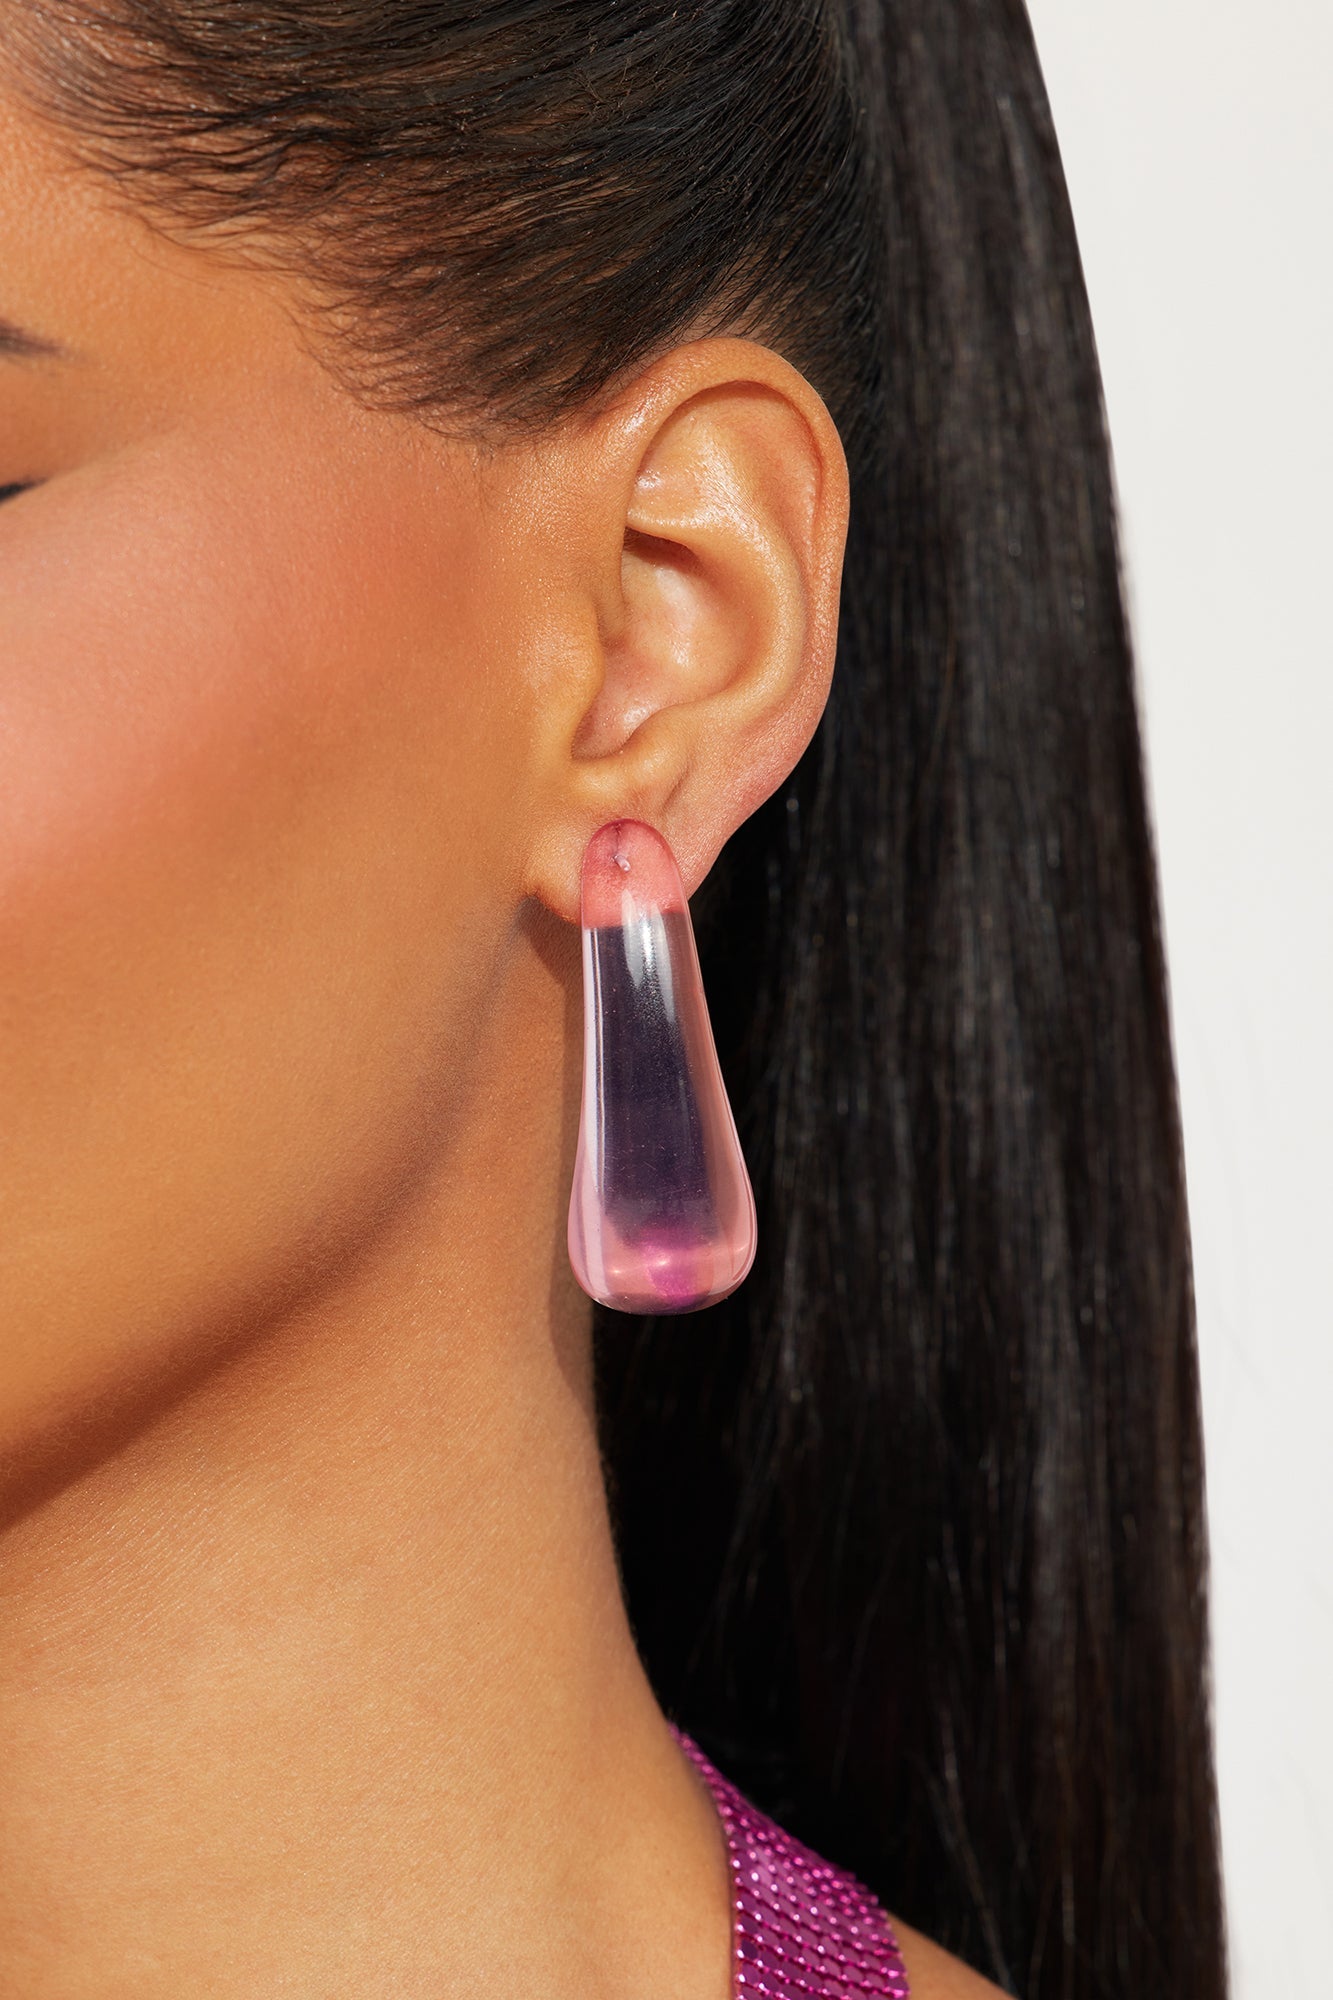 Quite Clearly Earrings - Pink